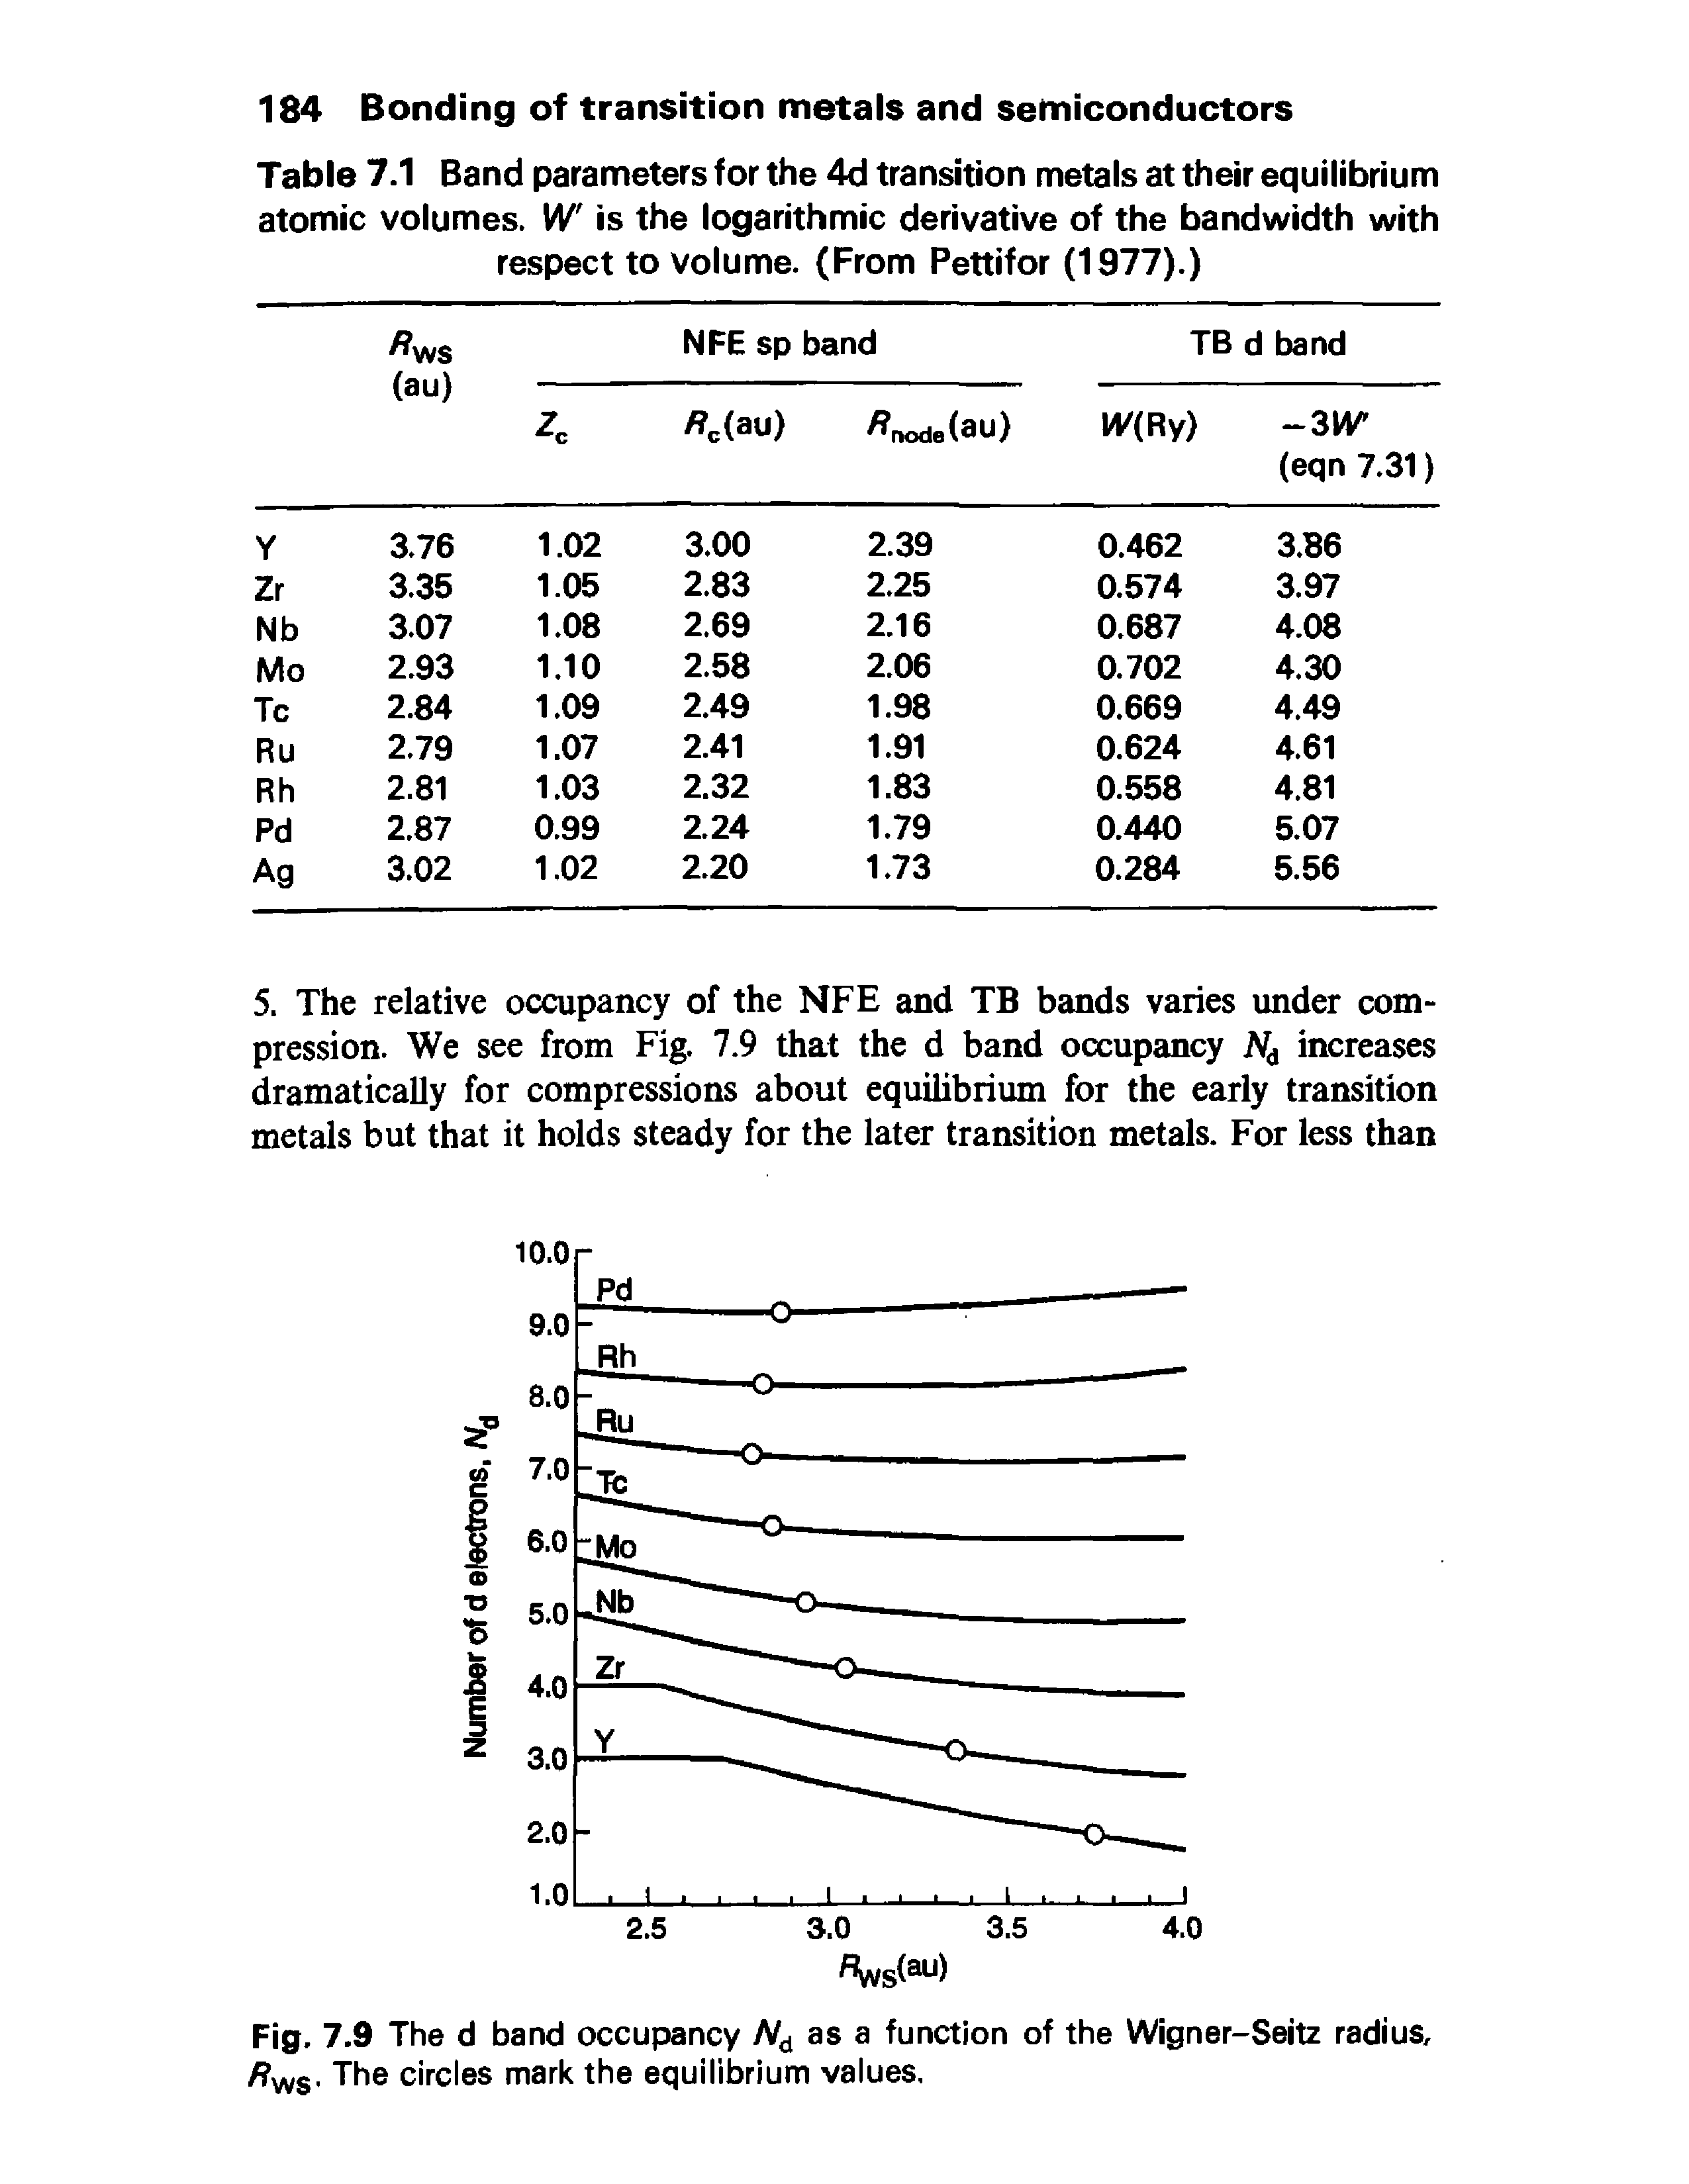 Table 7.1 Band parameters for the 4d transition metals at their equilibrium atomic volumes. W is the logarithmic derivative of the bandwidth with respect to volume. (From Pettifor (1977).)...